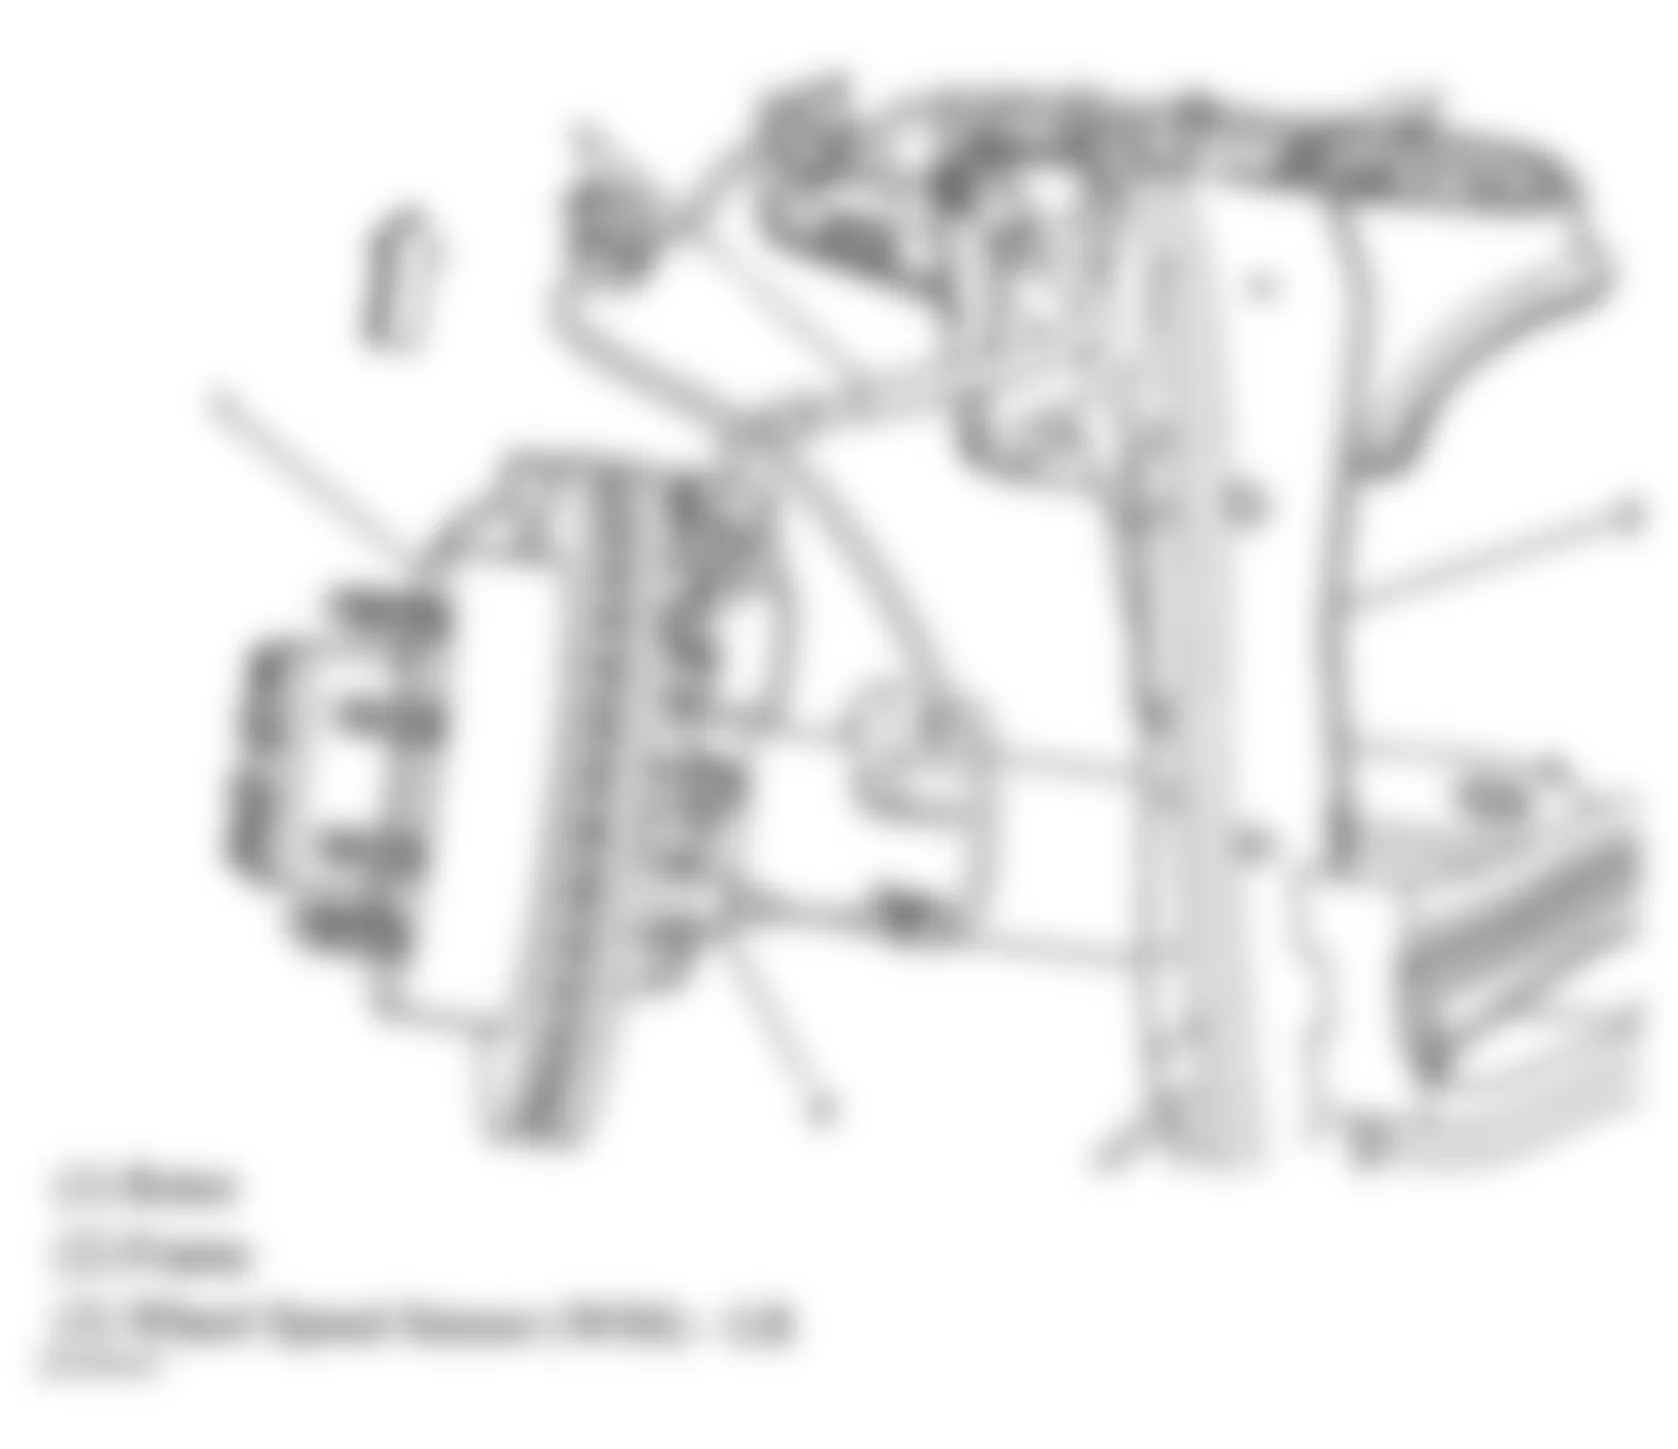 GMC Savana H1500 2006 - Component Locations -  Left Side Of Rear Axle